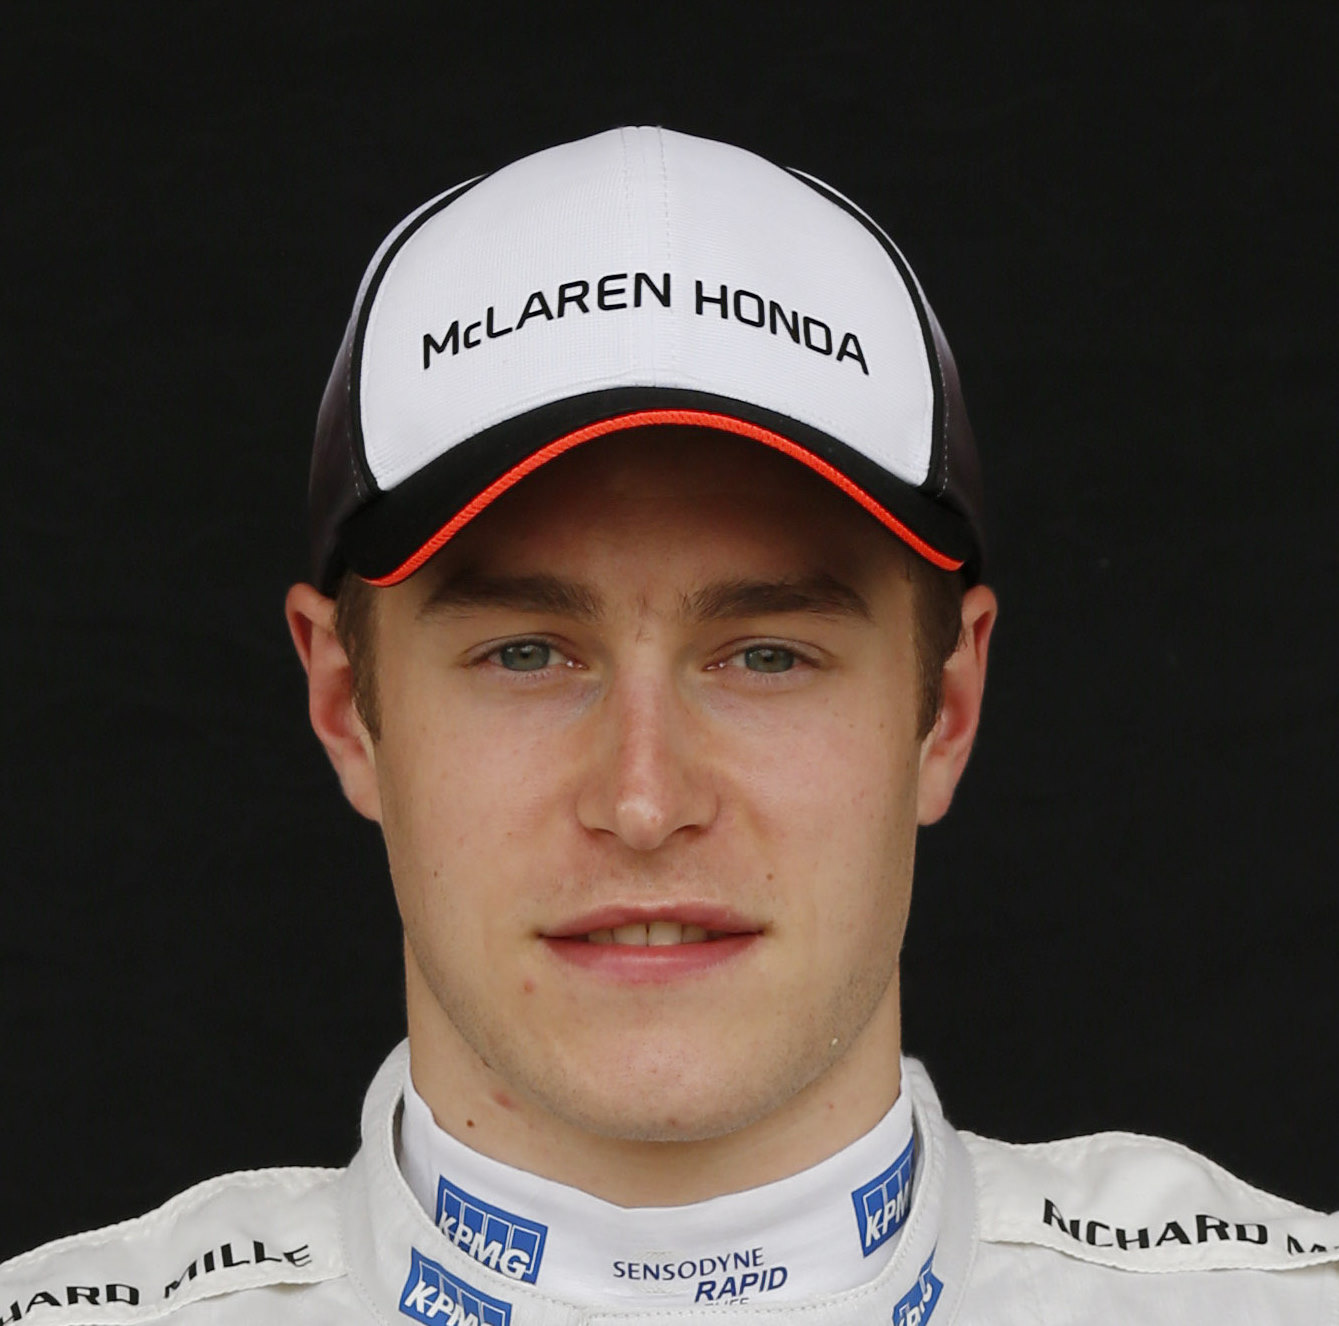 If Vandoorne is outpacing Alonso as many expect by the time contract talks open we suspect Alonso will not get a hefty contract and may choose to retire from F1